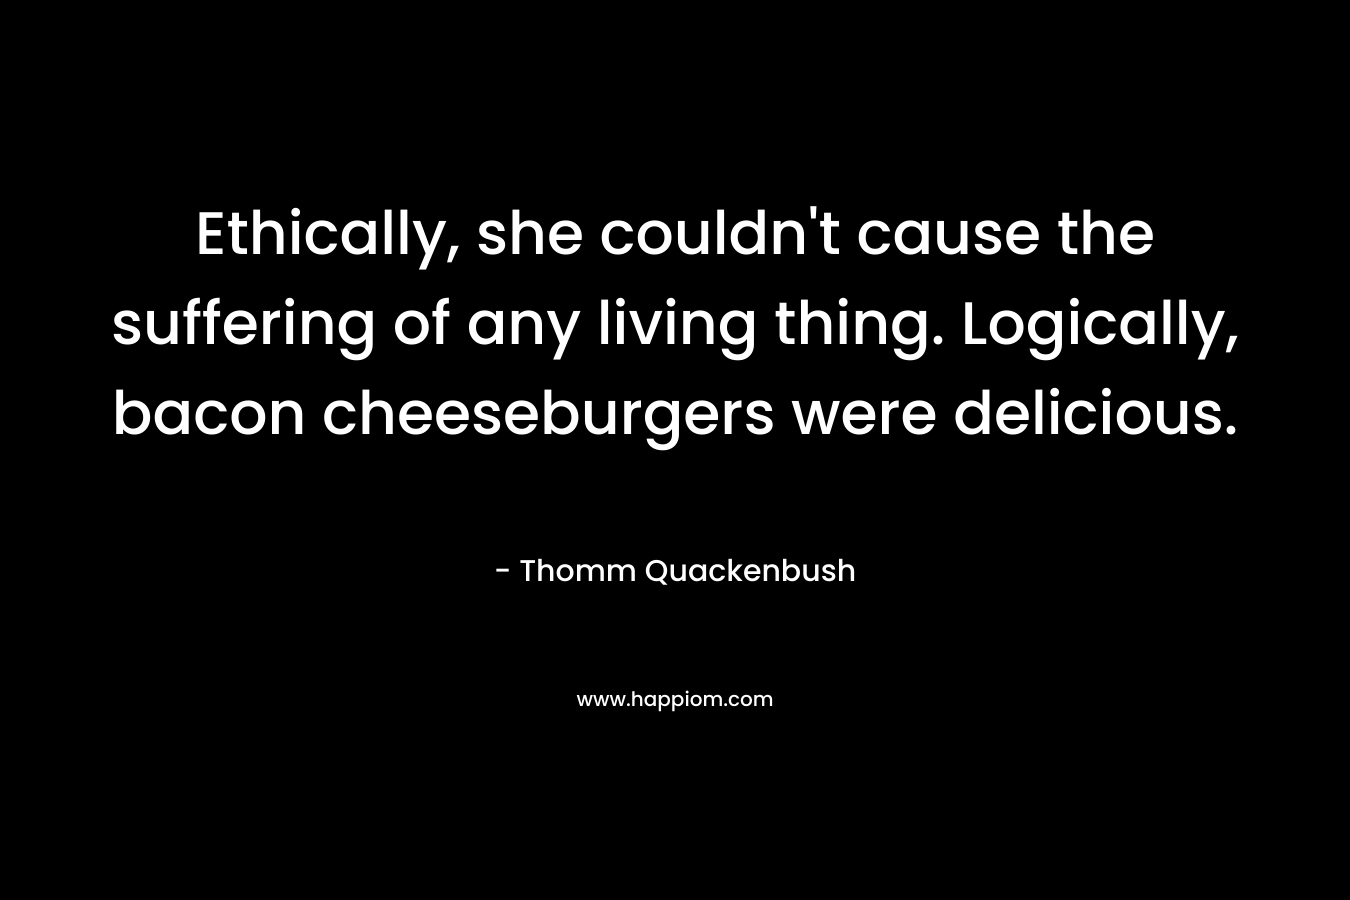 Ethically, she couldn't cause the suffering of any living thing. Logically, bacon cheeseburgers were delicious.